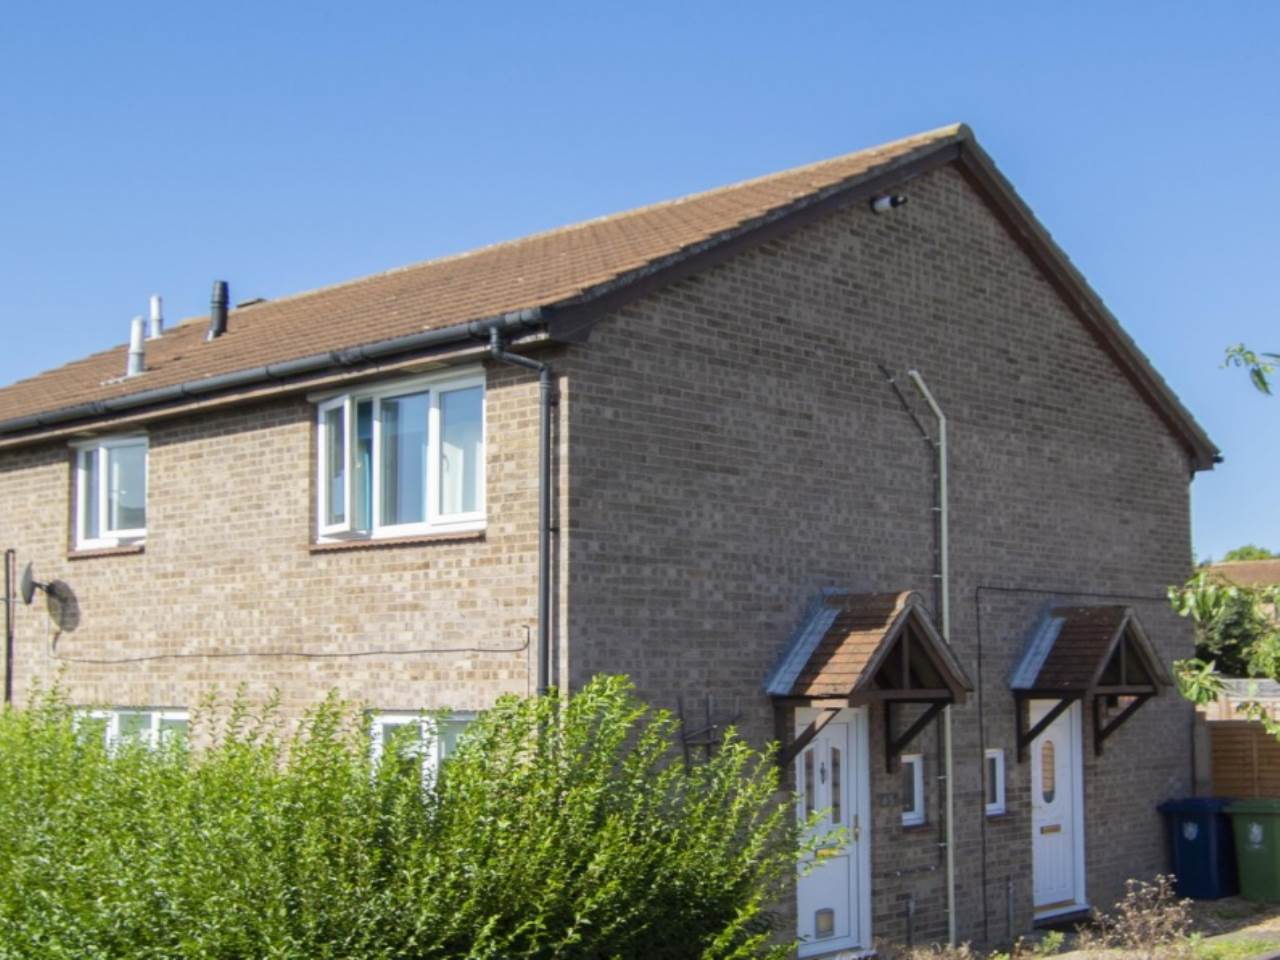 1 bed House (unspecified) for rent in Bar Hill. From Lets Rent Cambridge